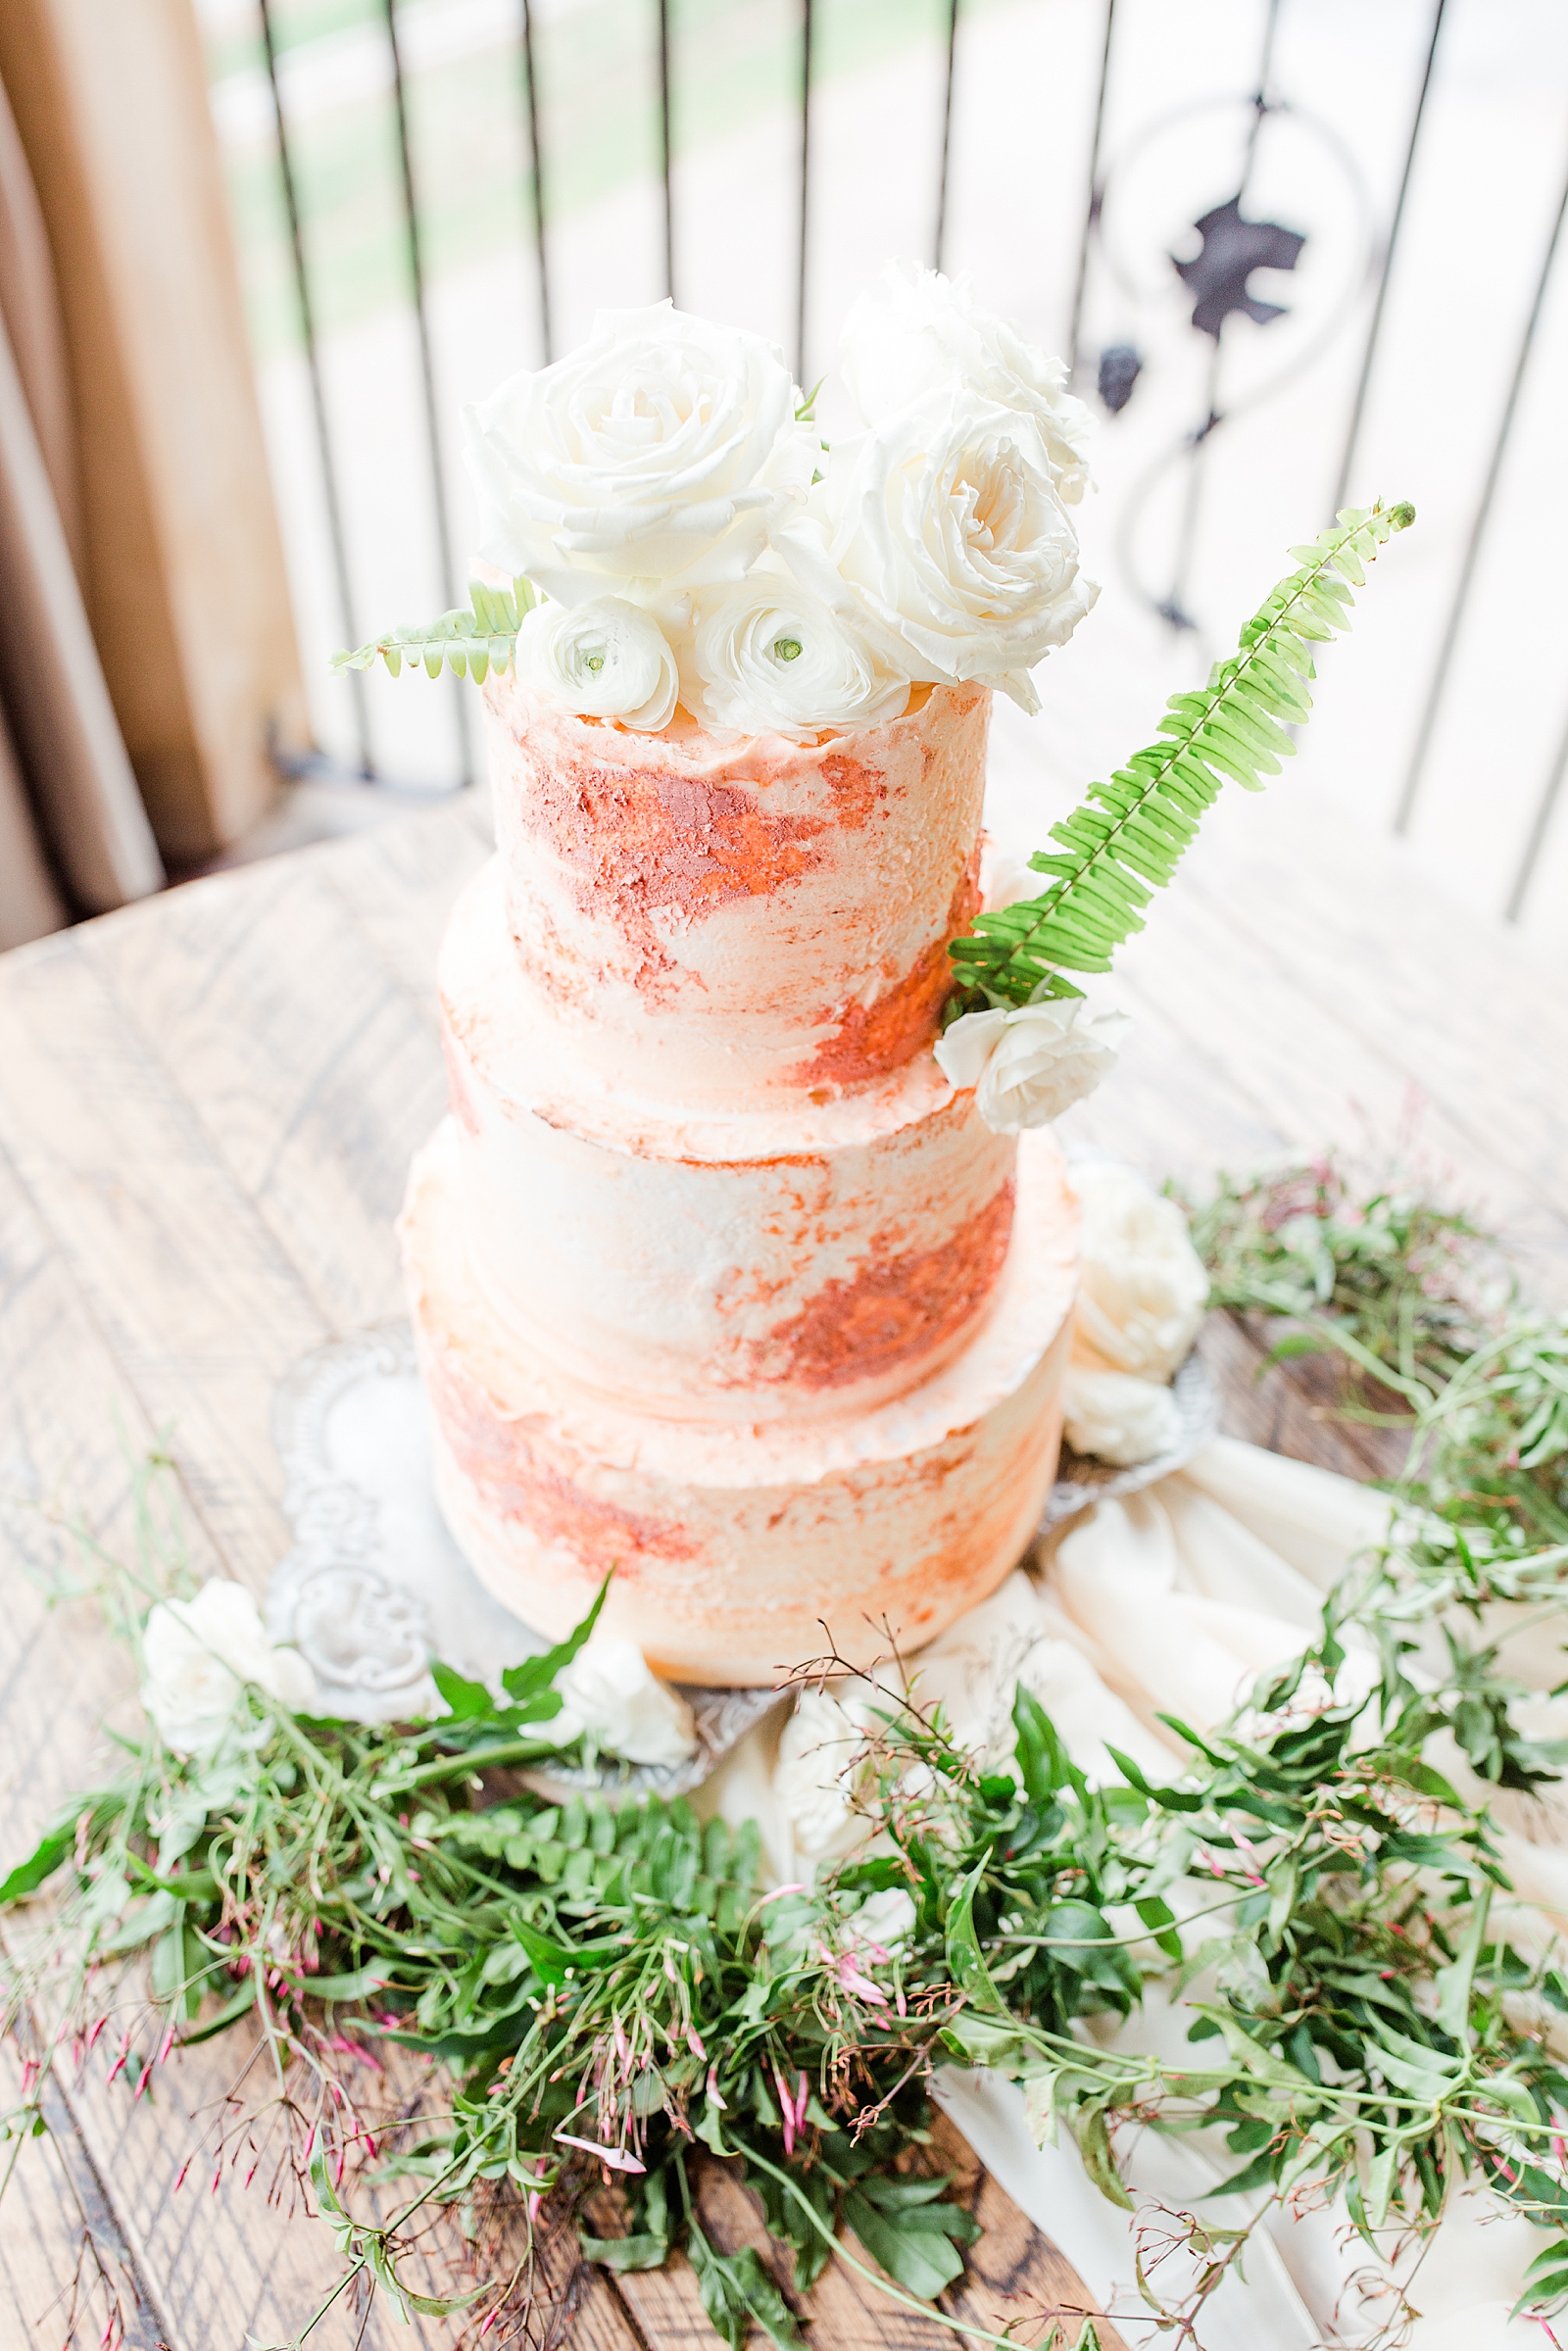 Montaluce Winery Wedding Reception Rustic Textured Cake with White Flowers Photo